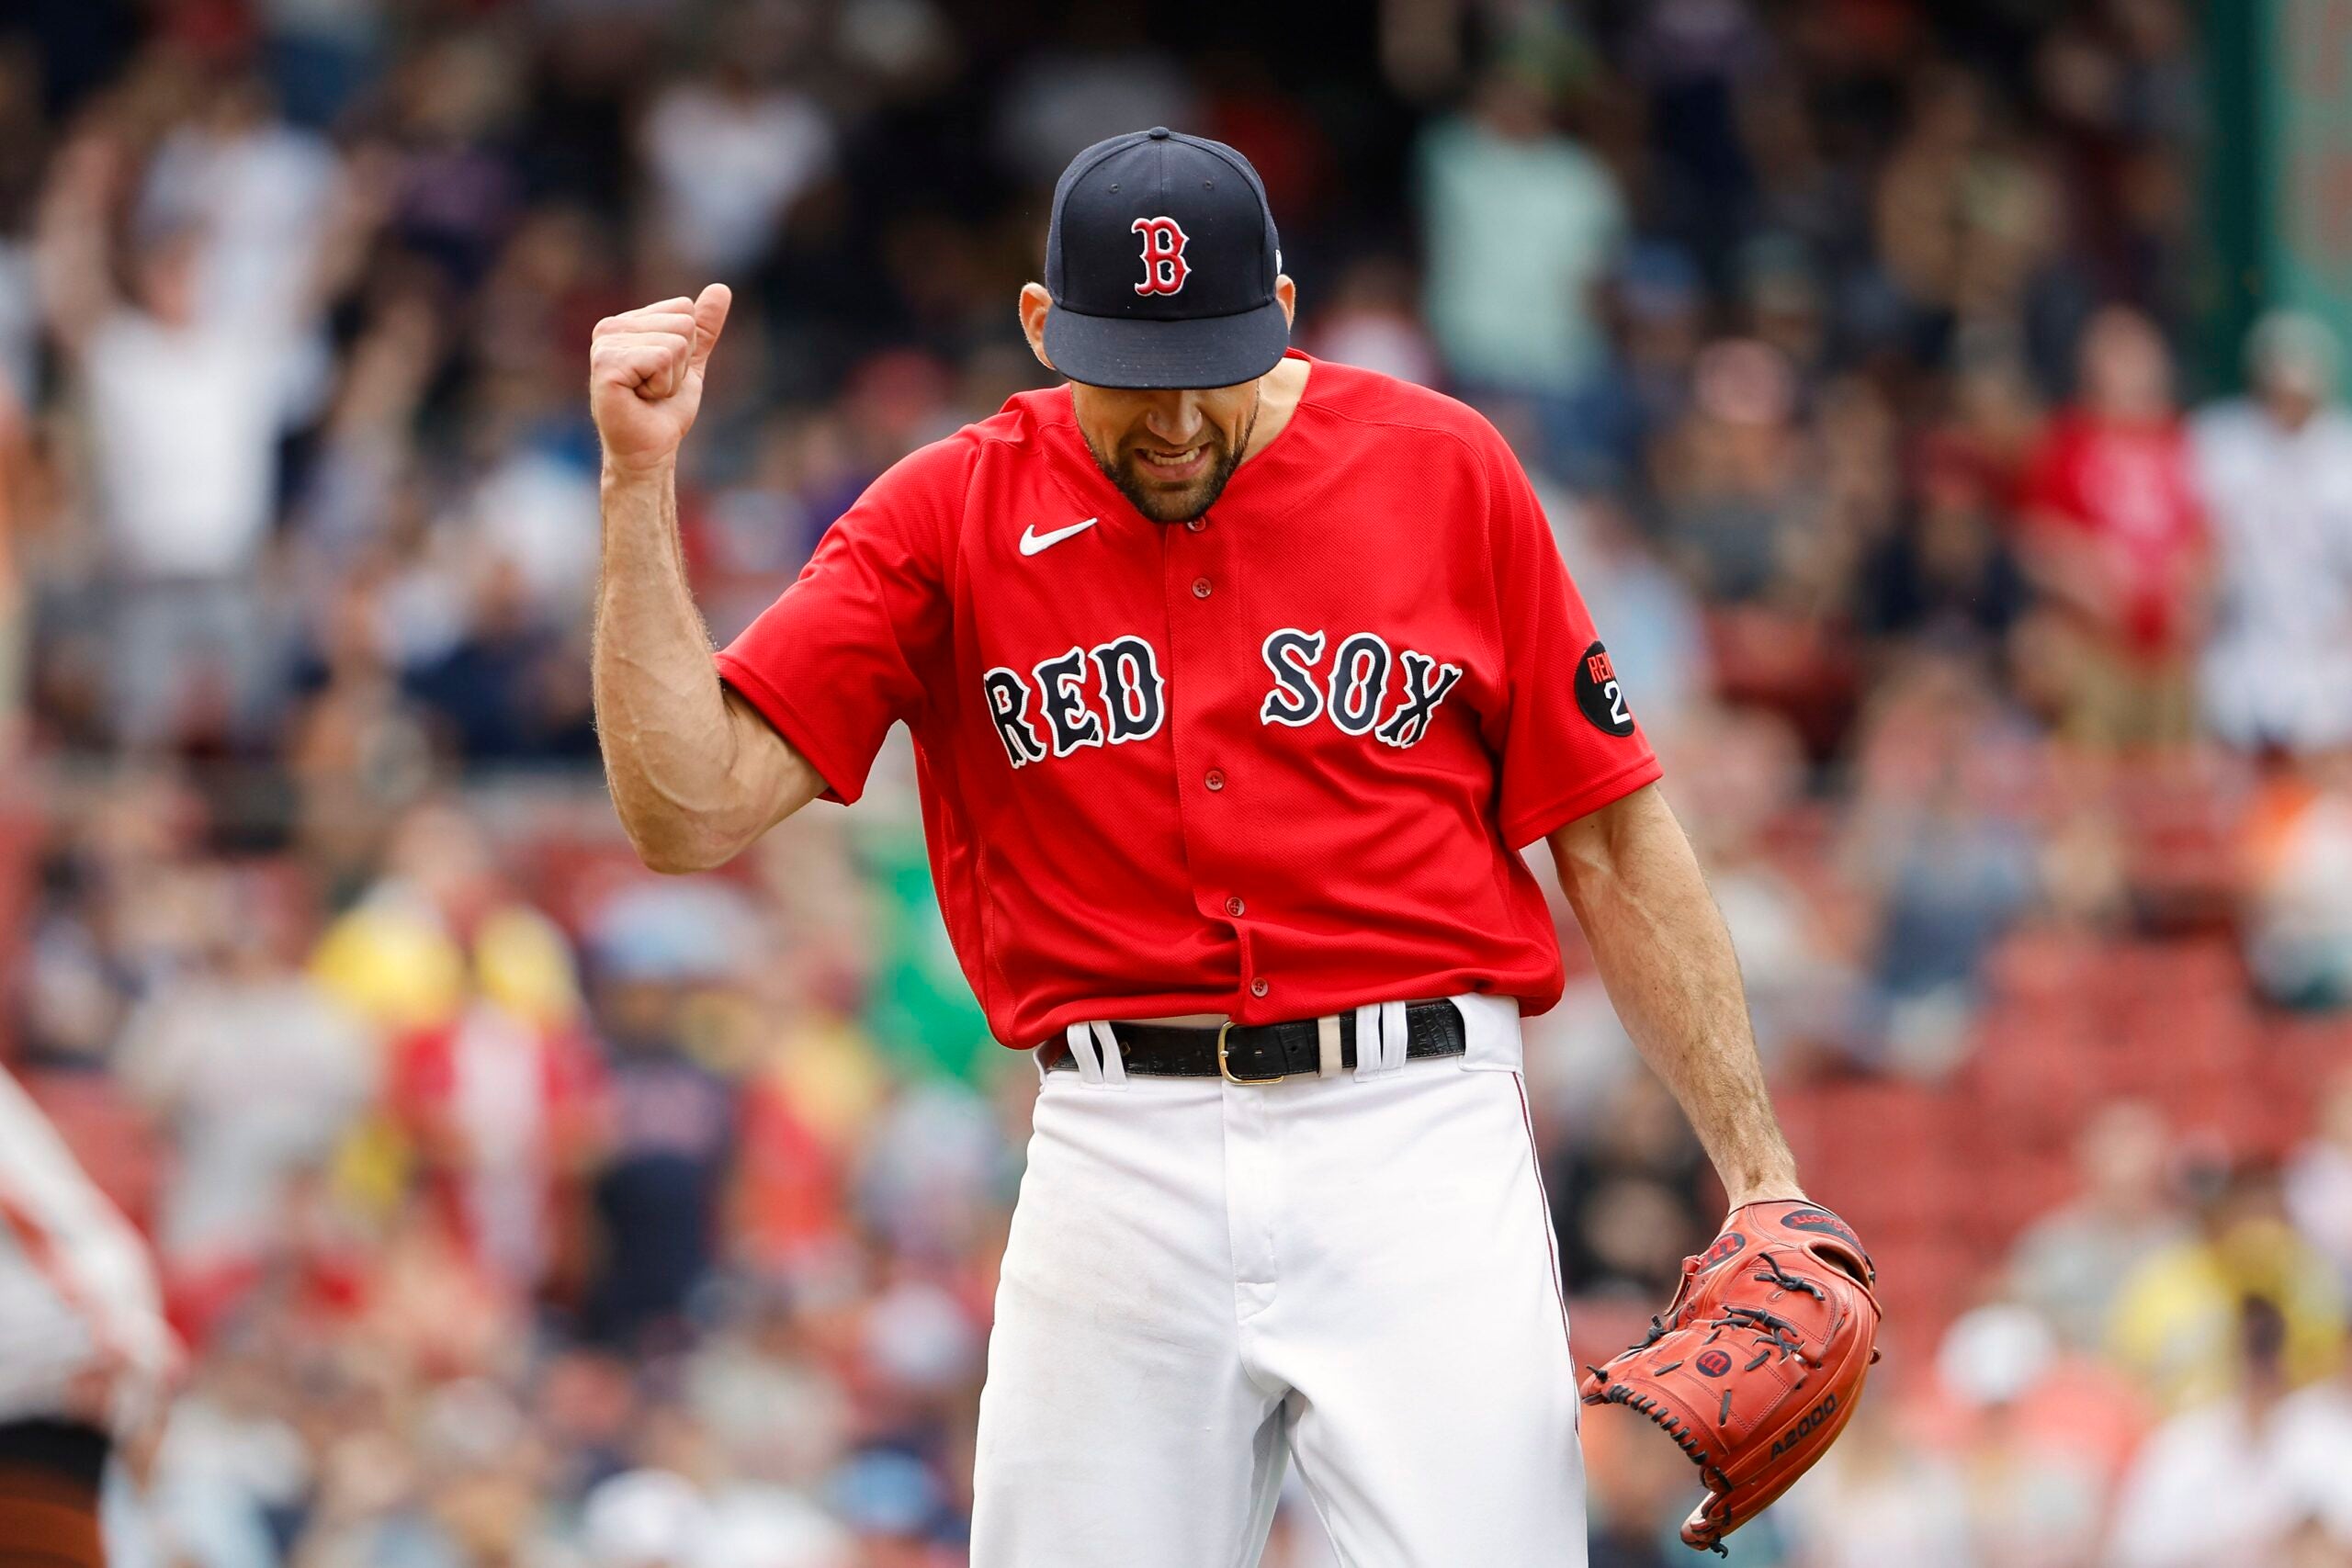 Red Sox 2023 New Year's resolutions with Nathan Eovaldi to Rangers instant  reaction, Locked On Red Son